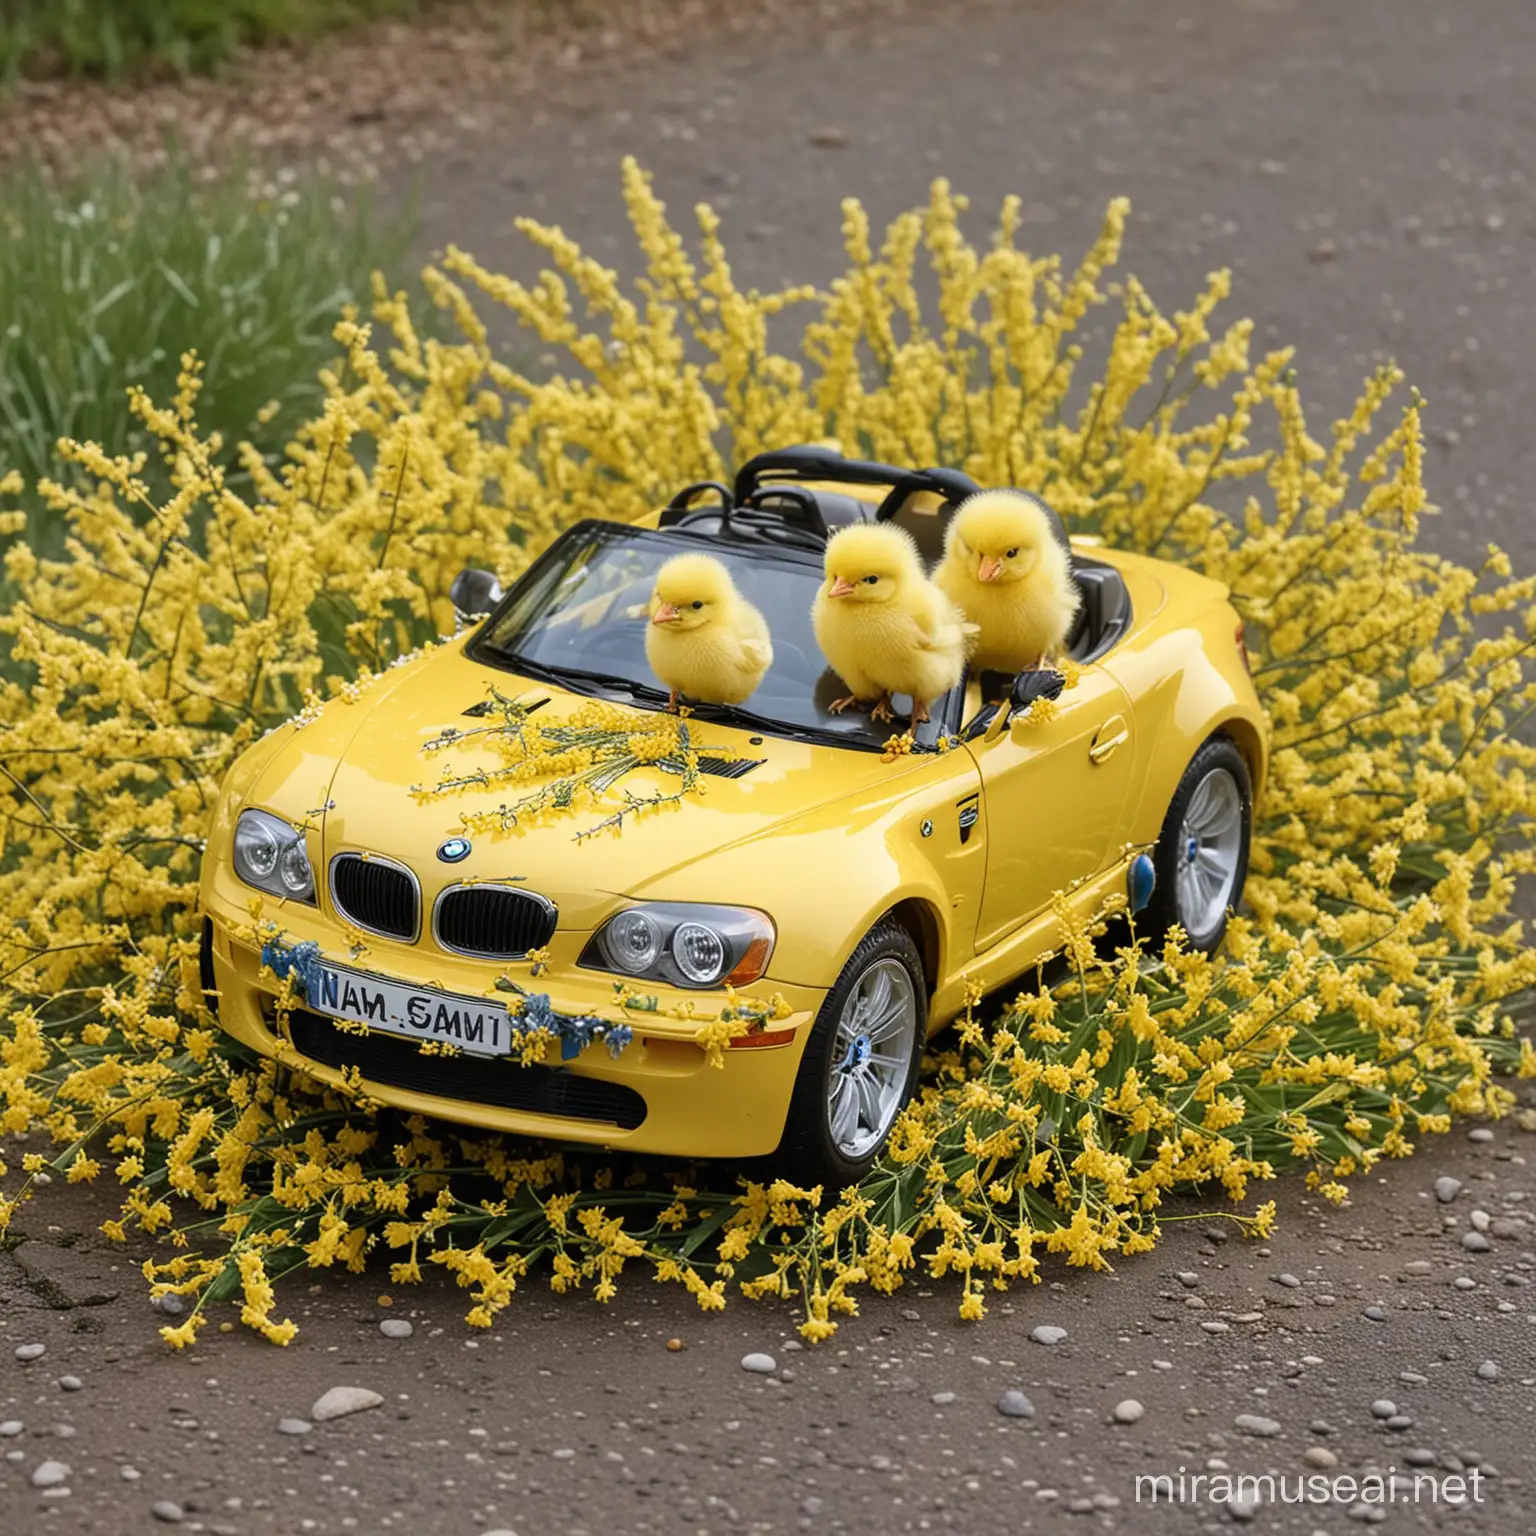 two Easter chicks in a BMW sports car around catkins and forsythia
